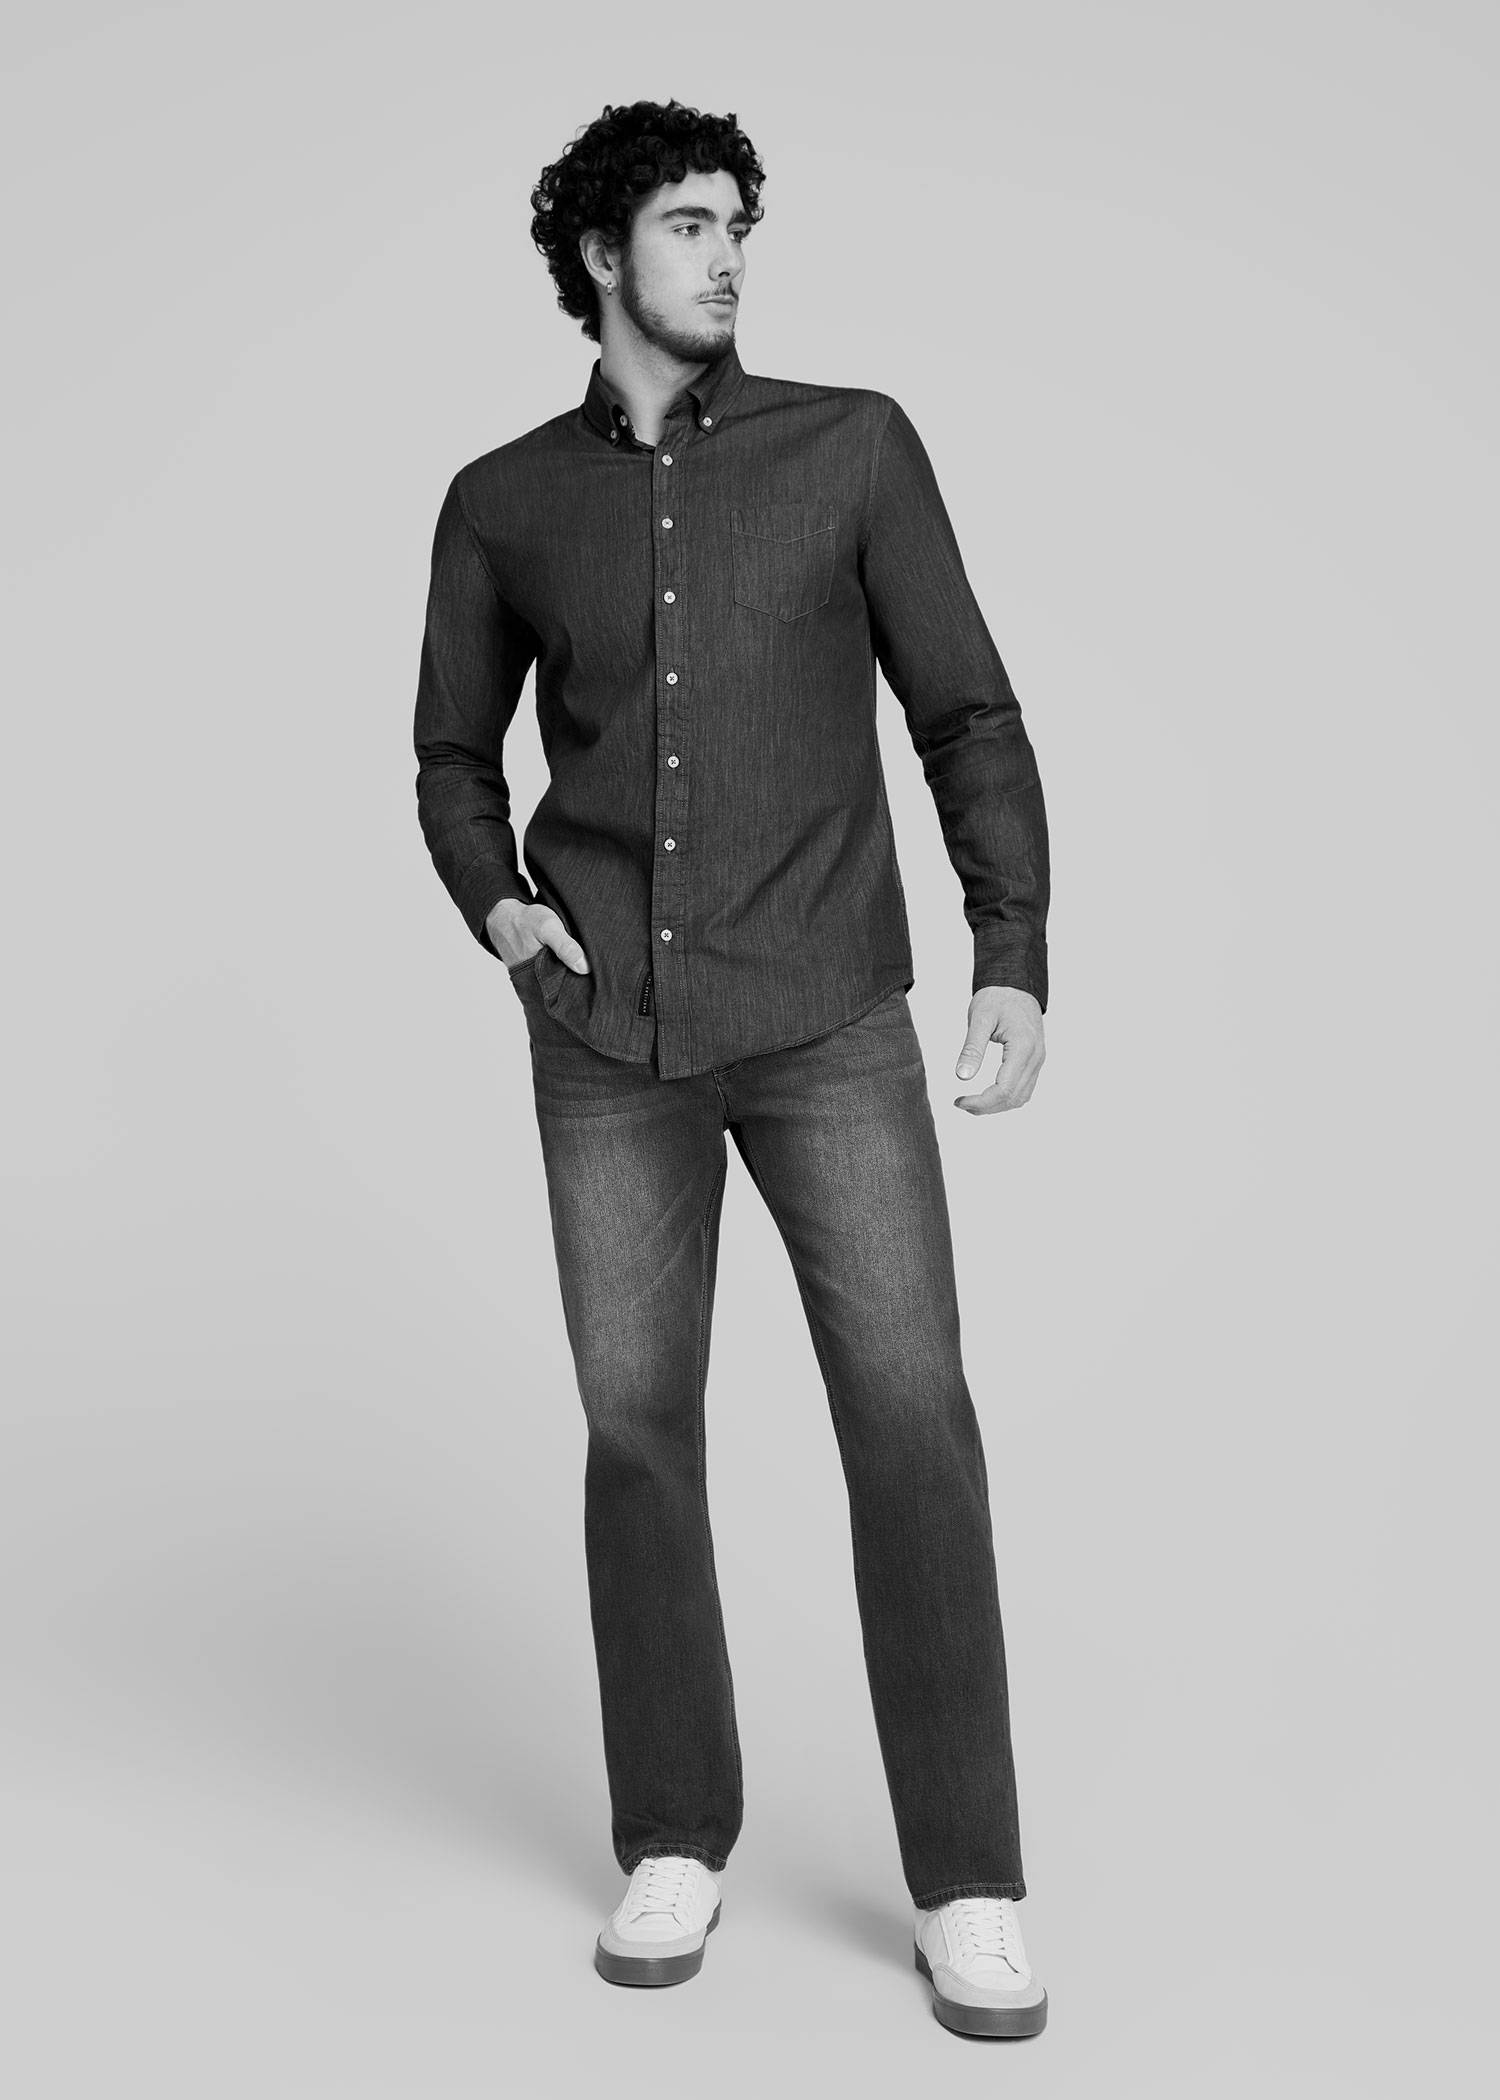 Tall man standing with his hand in his pocket wearing a dark denim shirt and jeans